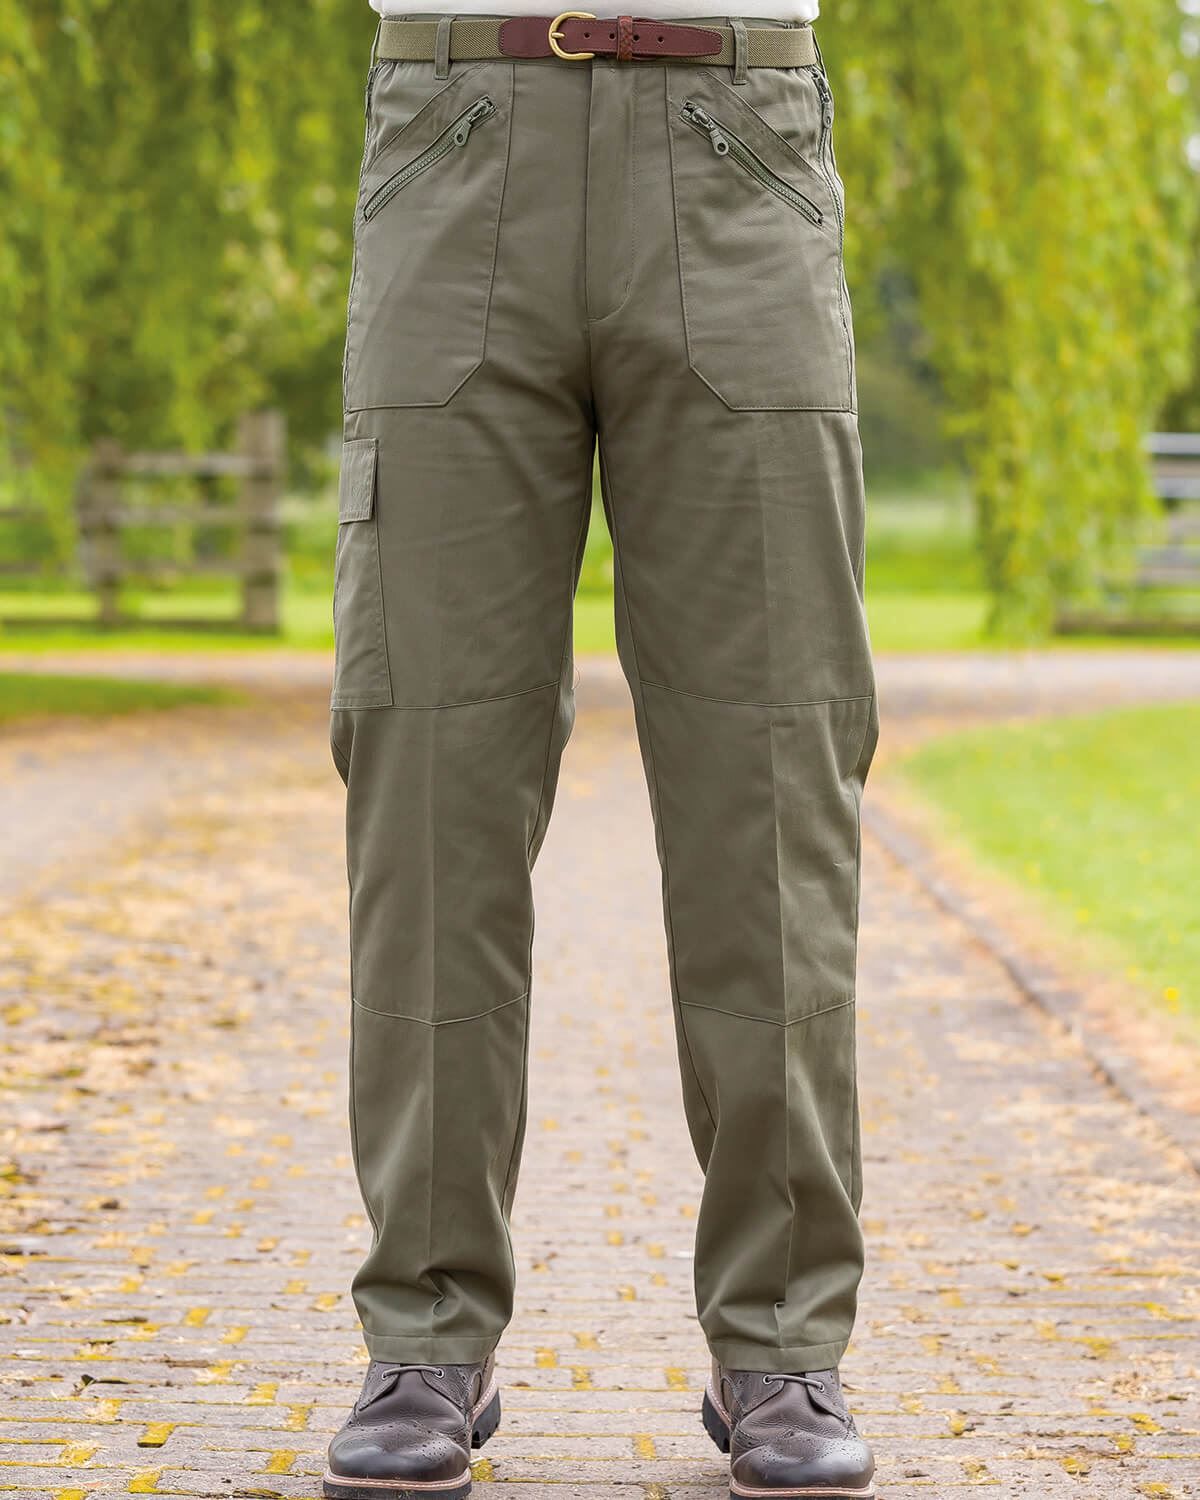 Mens Thermal Action Trousers, Mens Water repellent Trousers